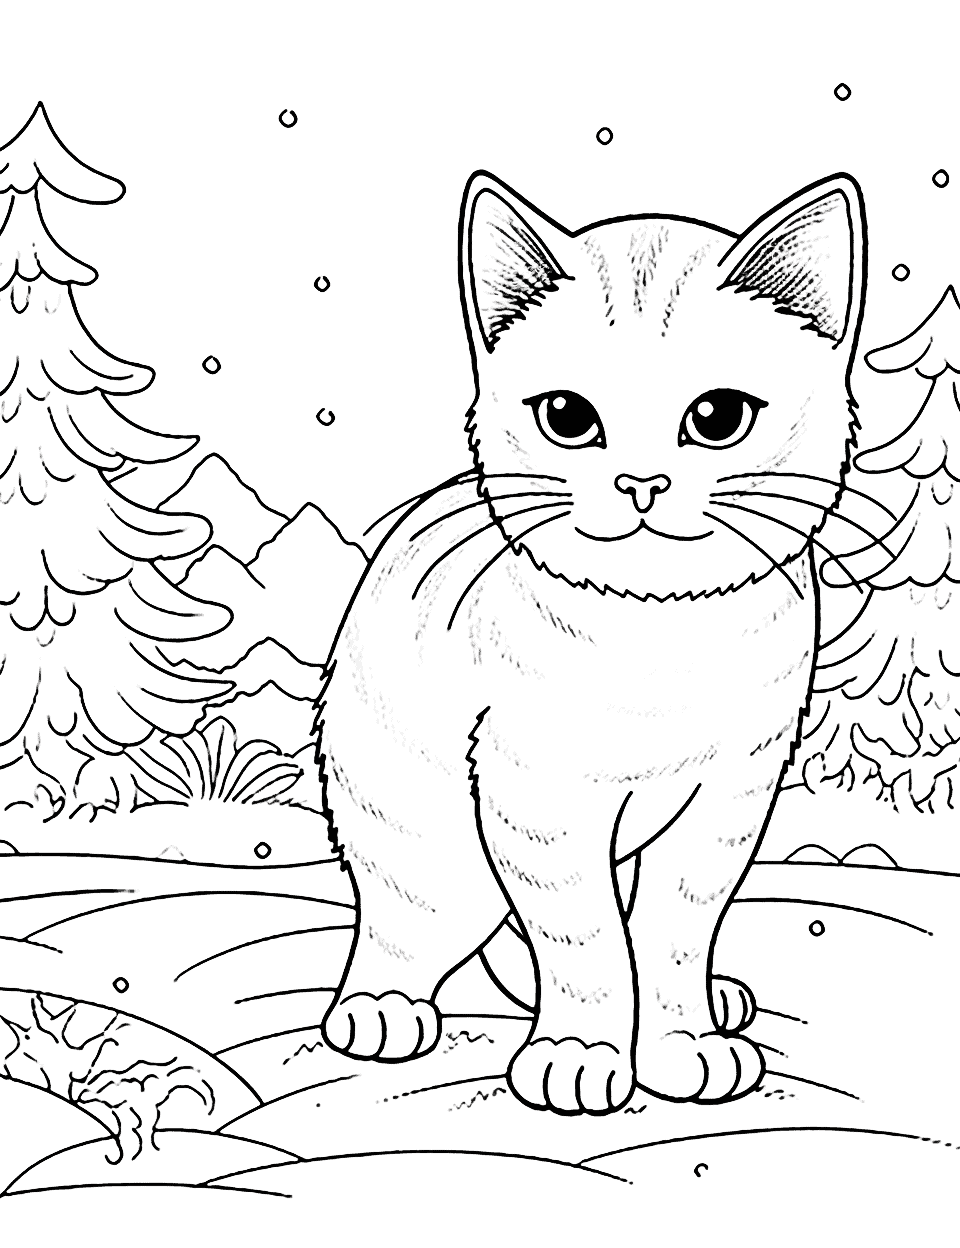 Detailed Cat in a Winter Landscape Coloring Page - A cat walking through a snowy landscape, with intricate patterns in the snowflakes.